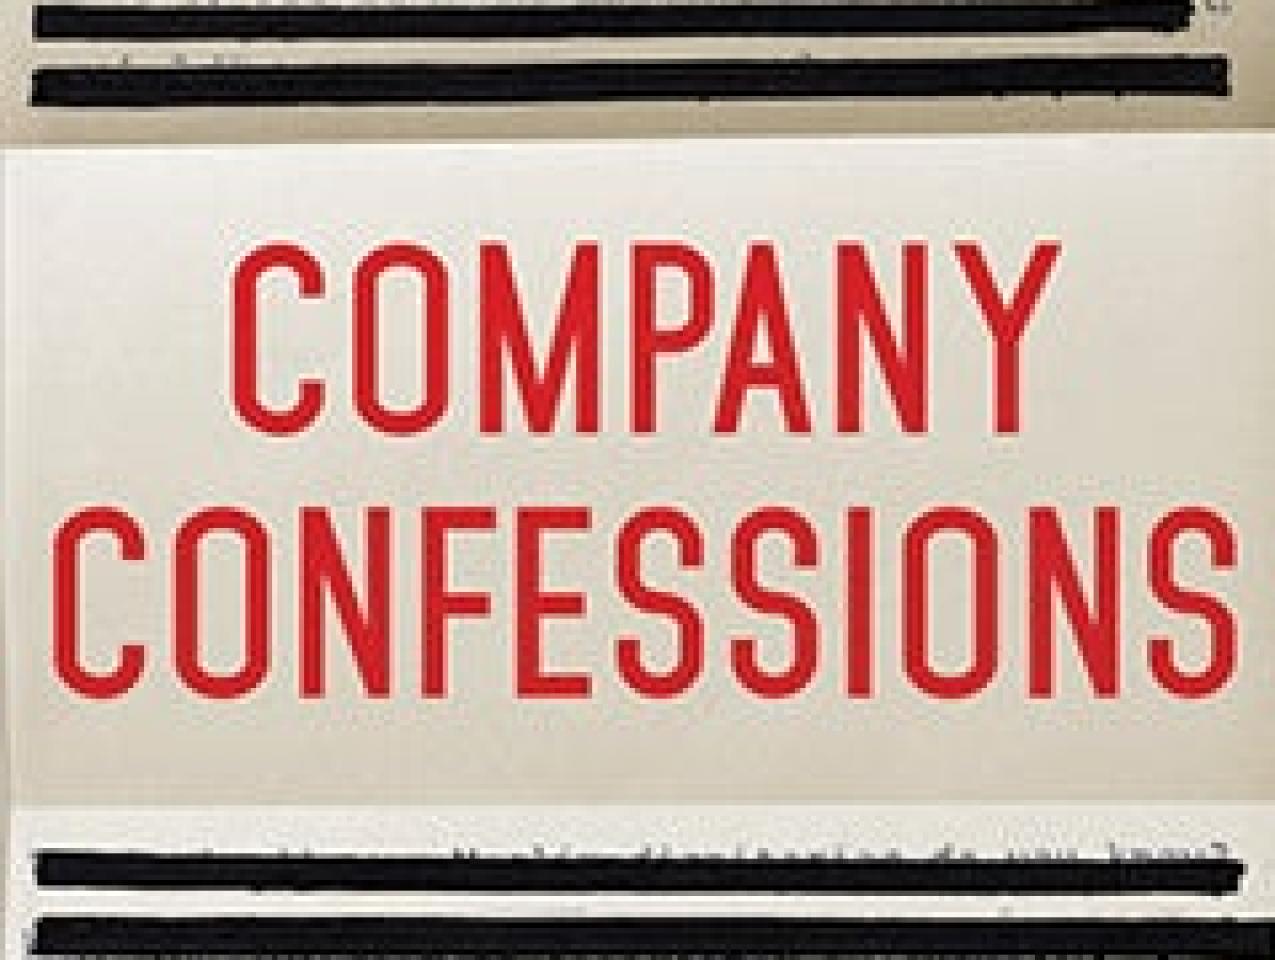 Image for Company Confessions: Secrets, Memoirs, And The CIA